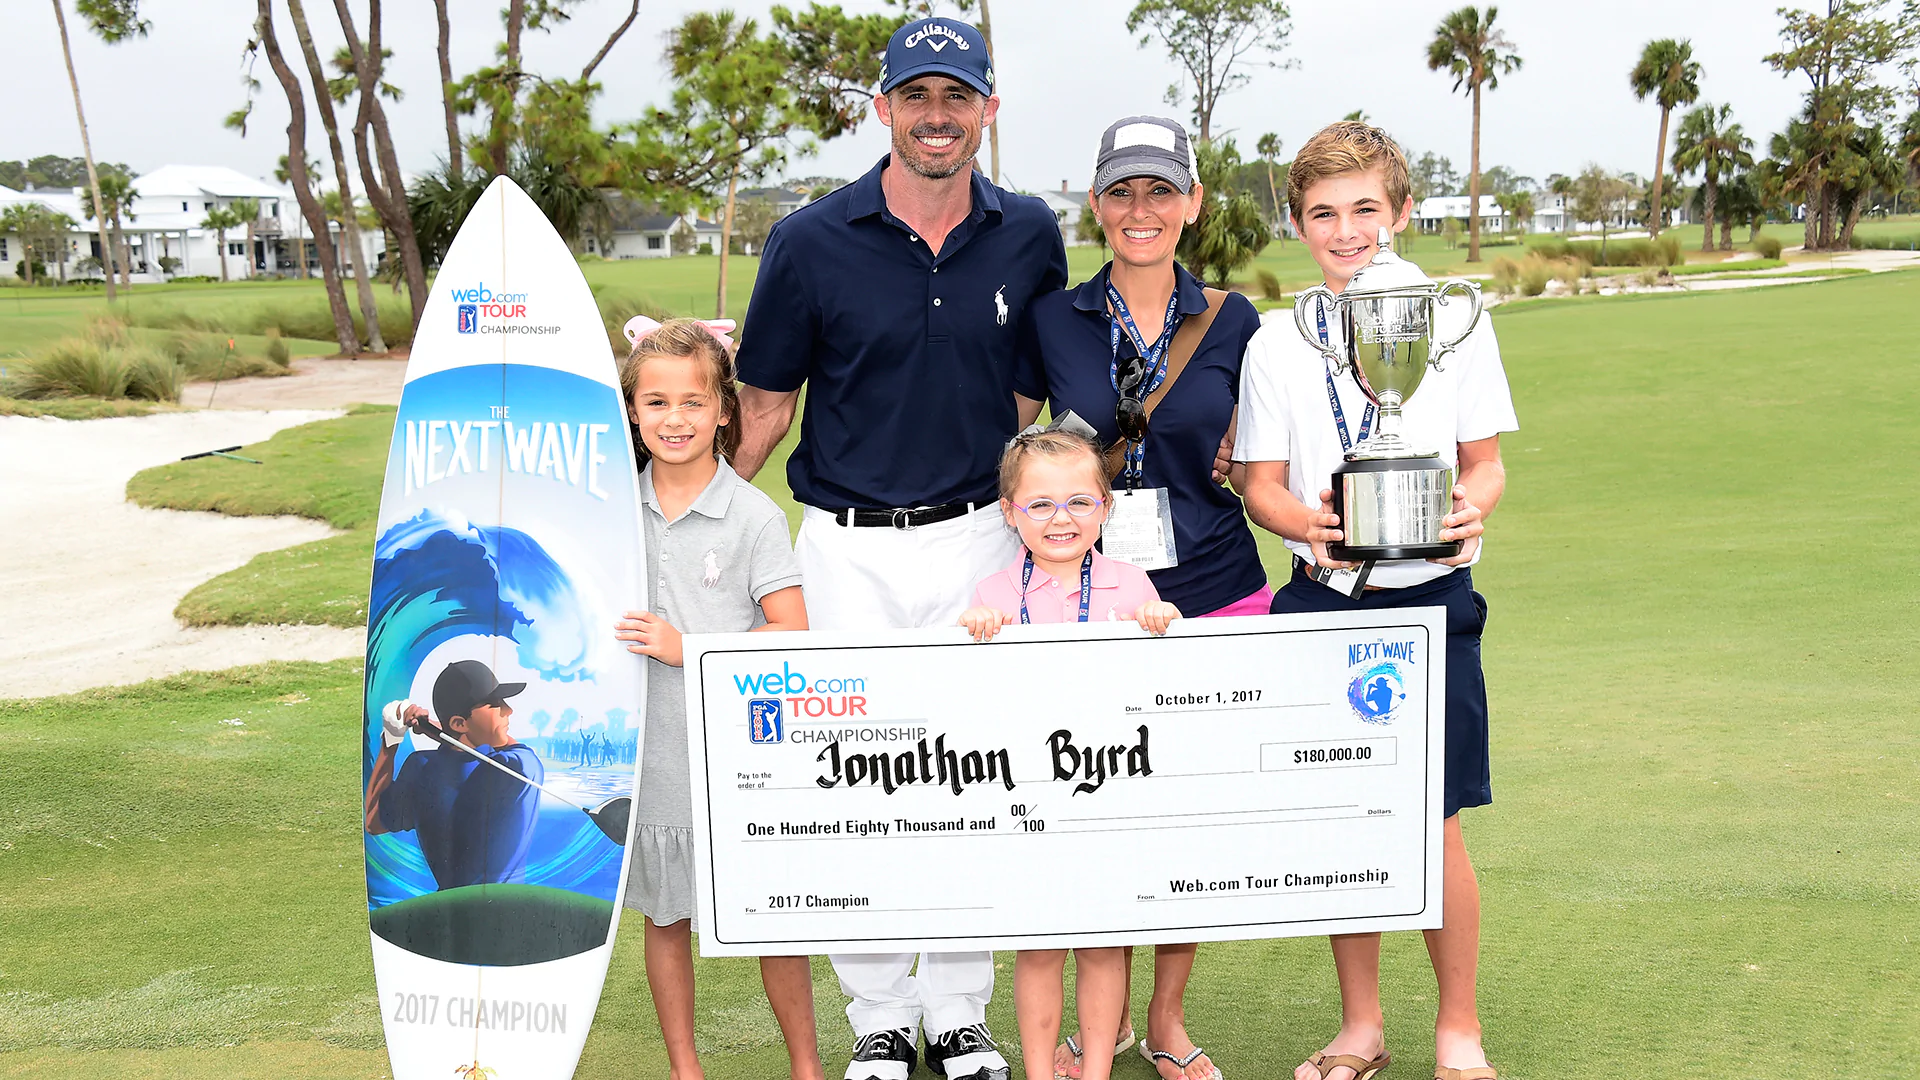 Byrd and his 11-year-old nearly beat Snedeker, Brown